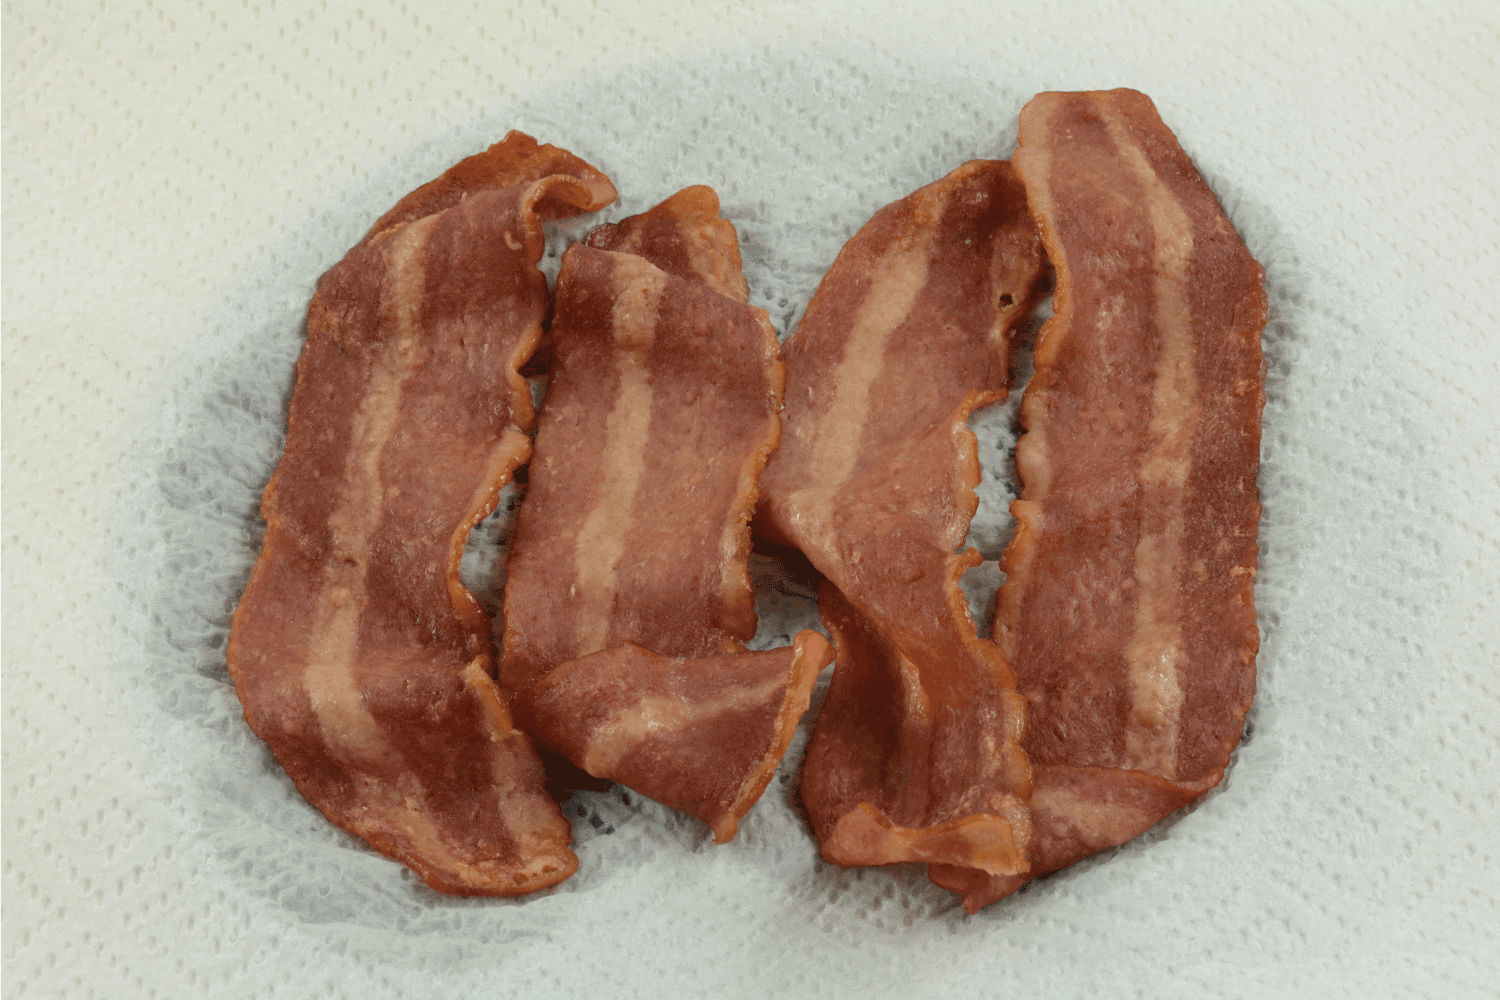  microwaved turkey bacon cooked on paper towel to reduce and absorb excess grease